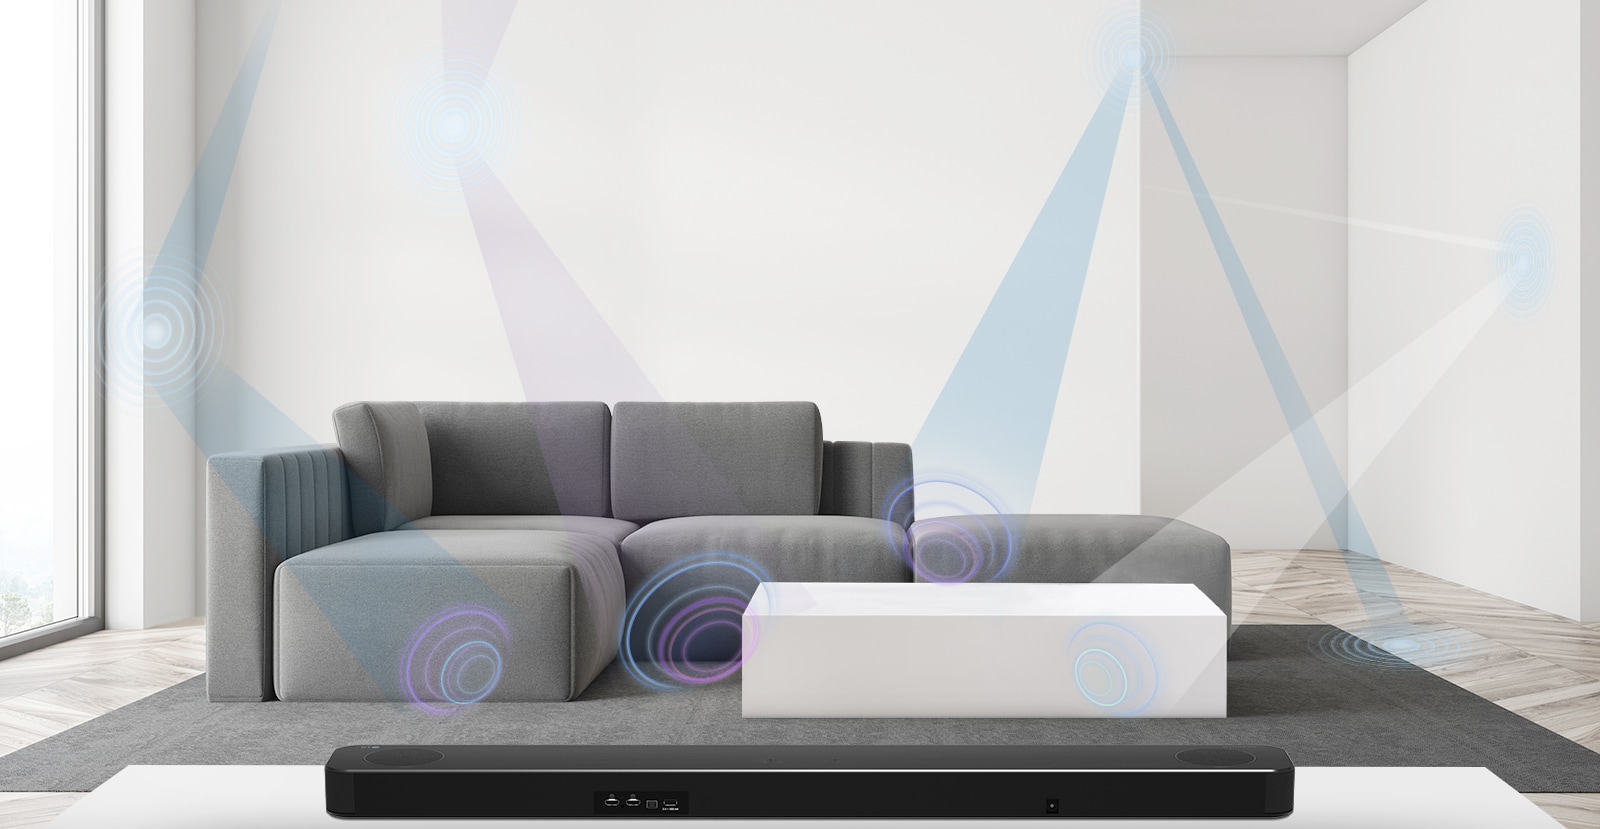 Back of LG Soundbar in living room with gray sofa in the center. Graphics of the wavelength measuring the space are shown.